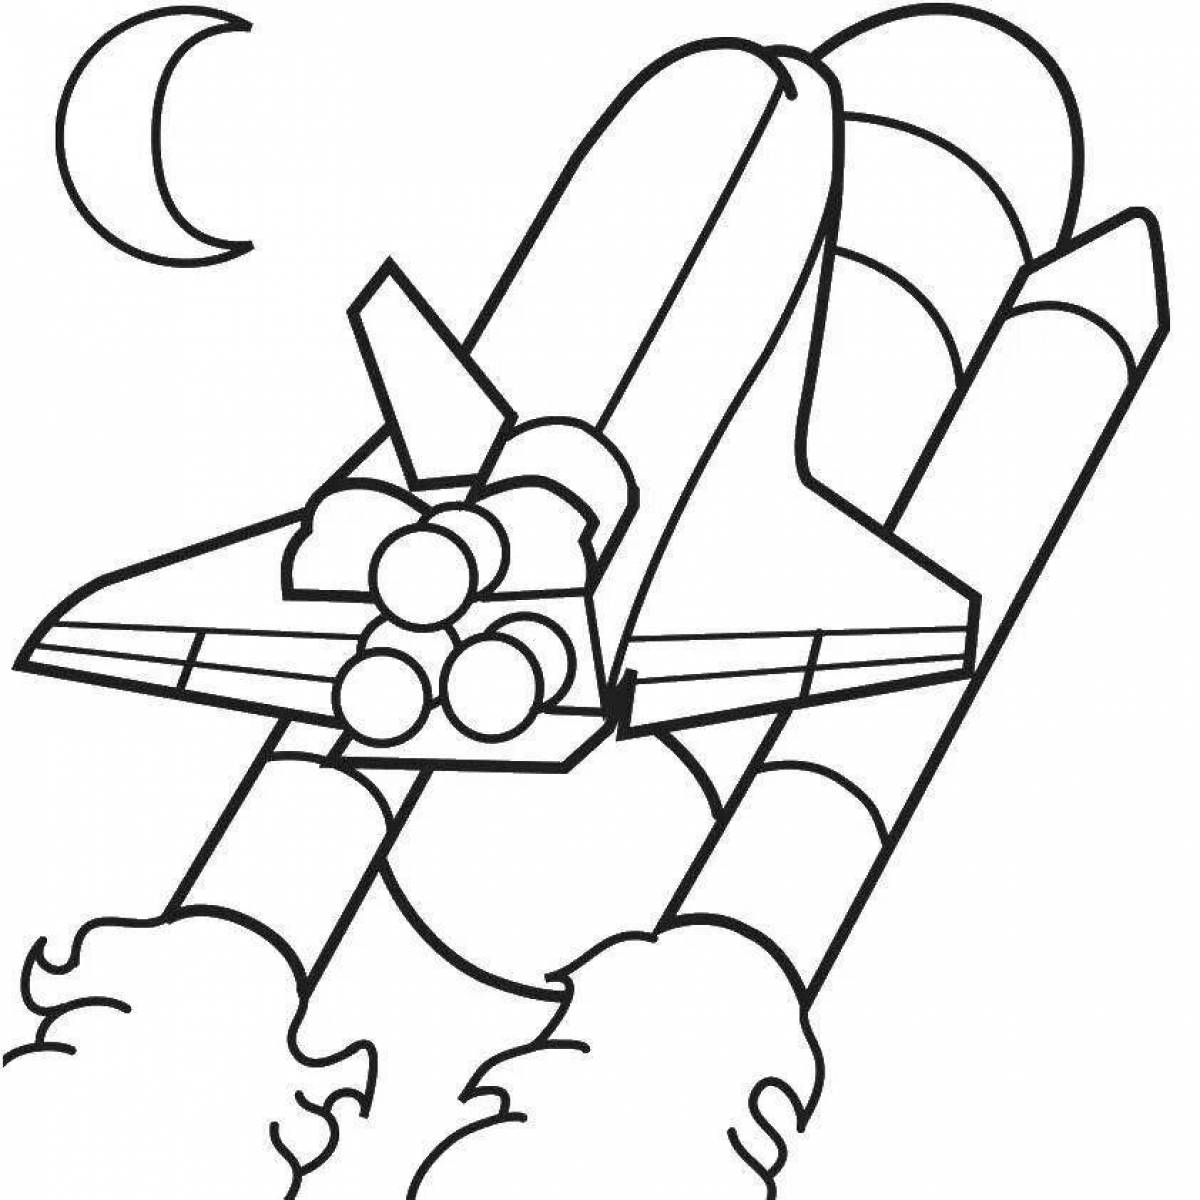 Amazing rocket launcher coloring page